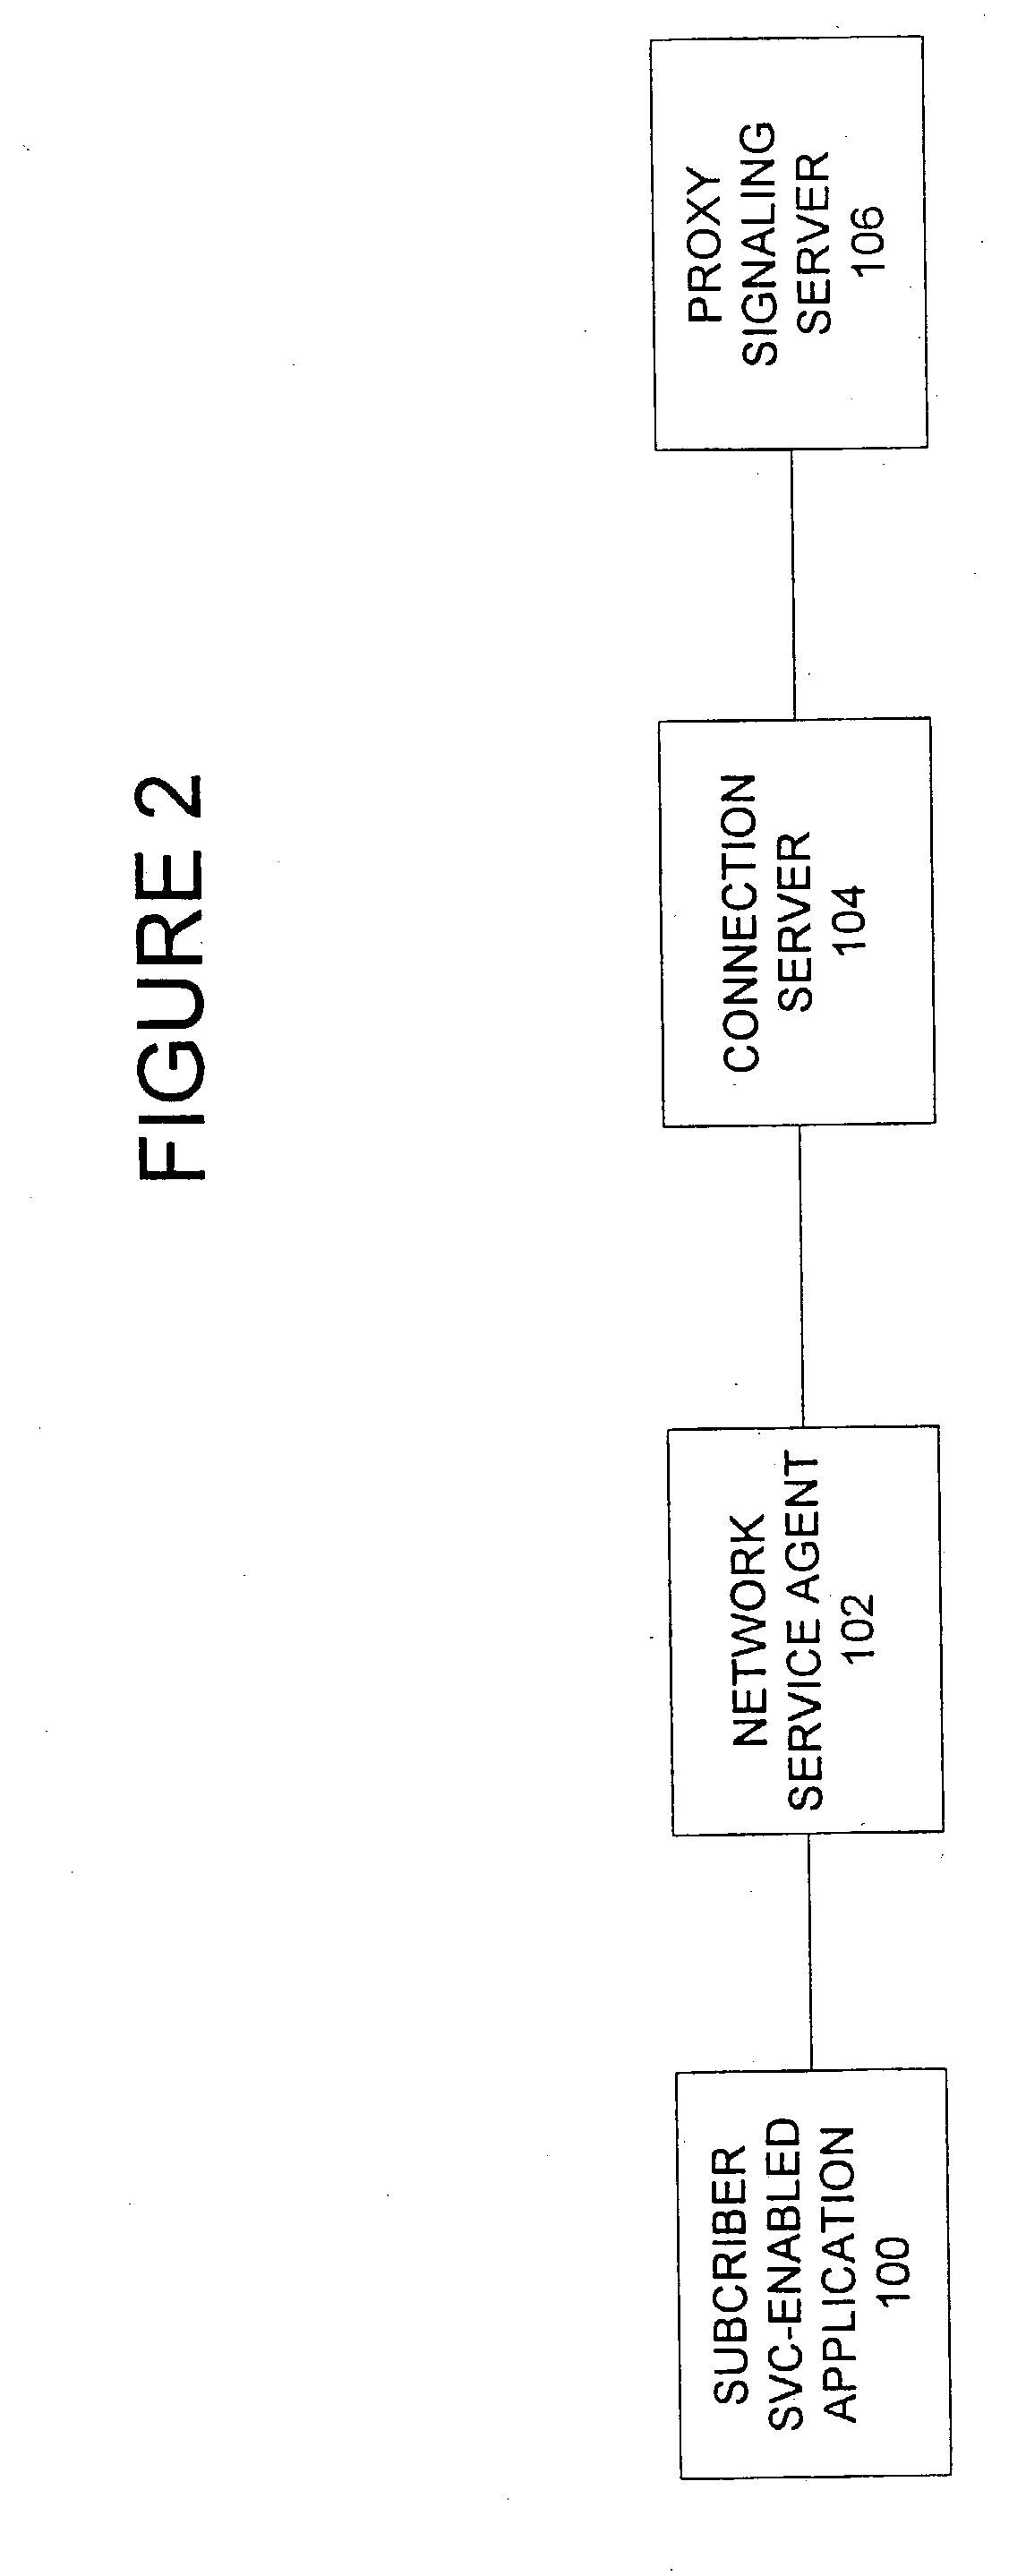 Extended virtual user-to-network interface with ATM network